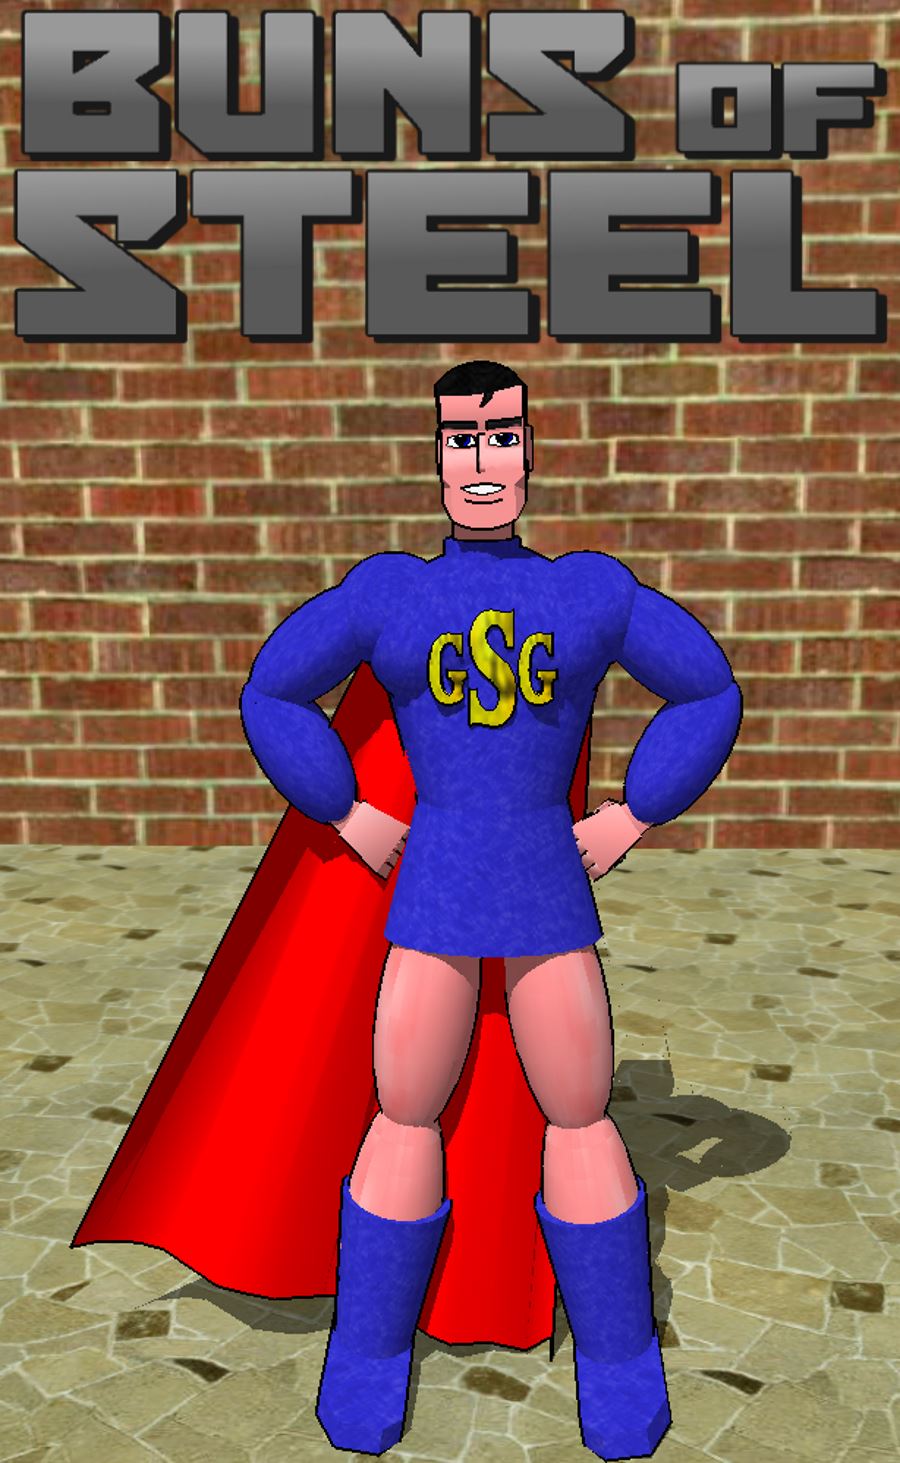 BUNS OF STEEL - A new super hero brings his own brand of justice to Mean City.